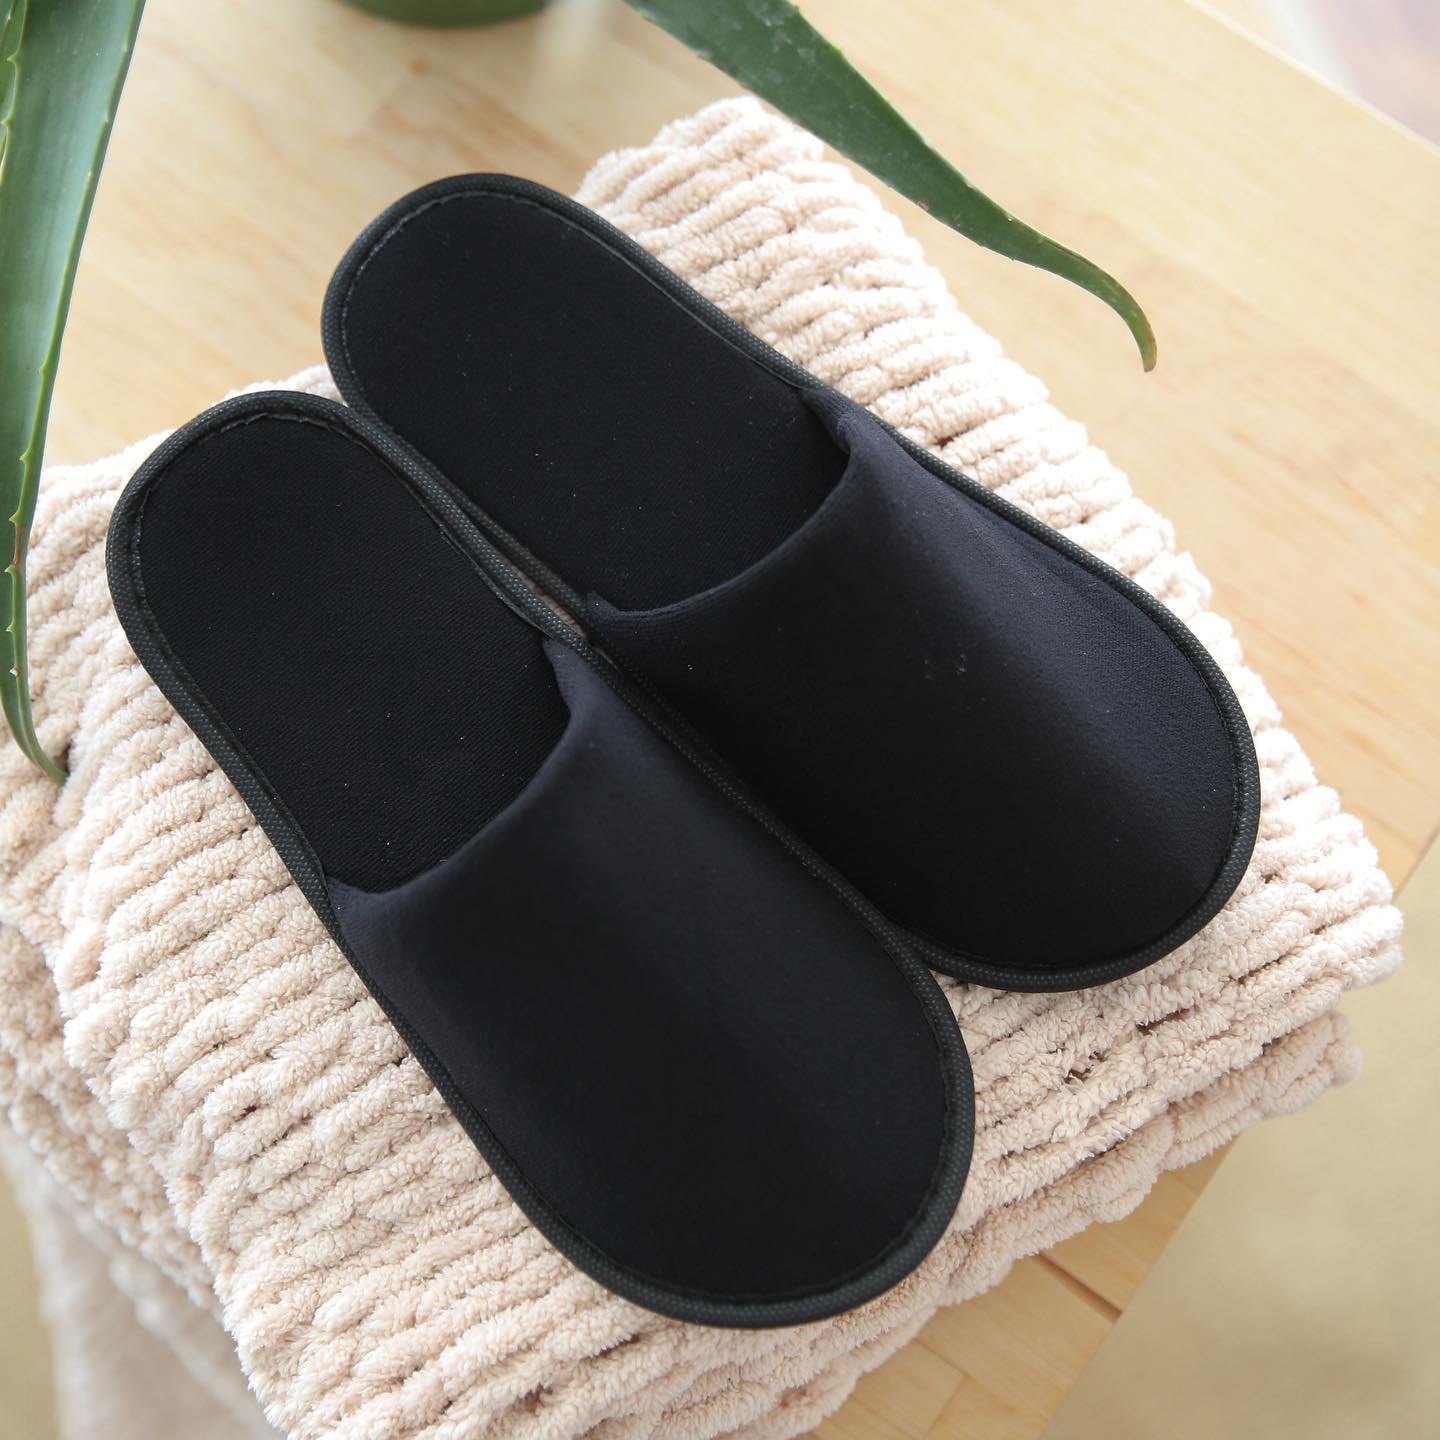 Chochili Black 10 Pairs Fabric Packed Terry Cotton Disposable Hotel Slippers for Airbnb Spa Wedding Guests Adult Men Women Size 10-11 - supplyity